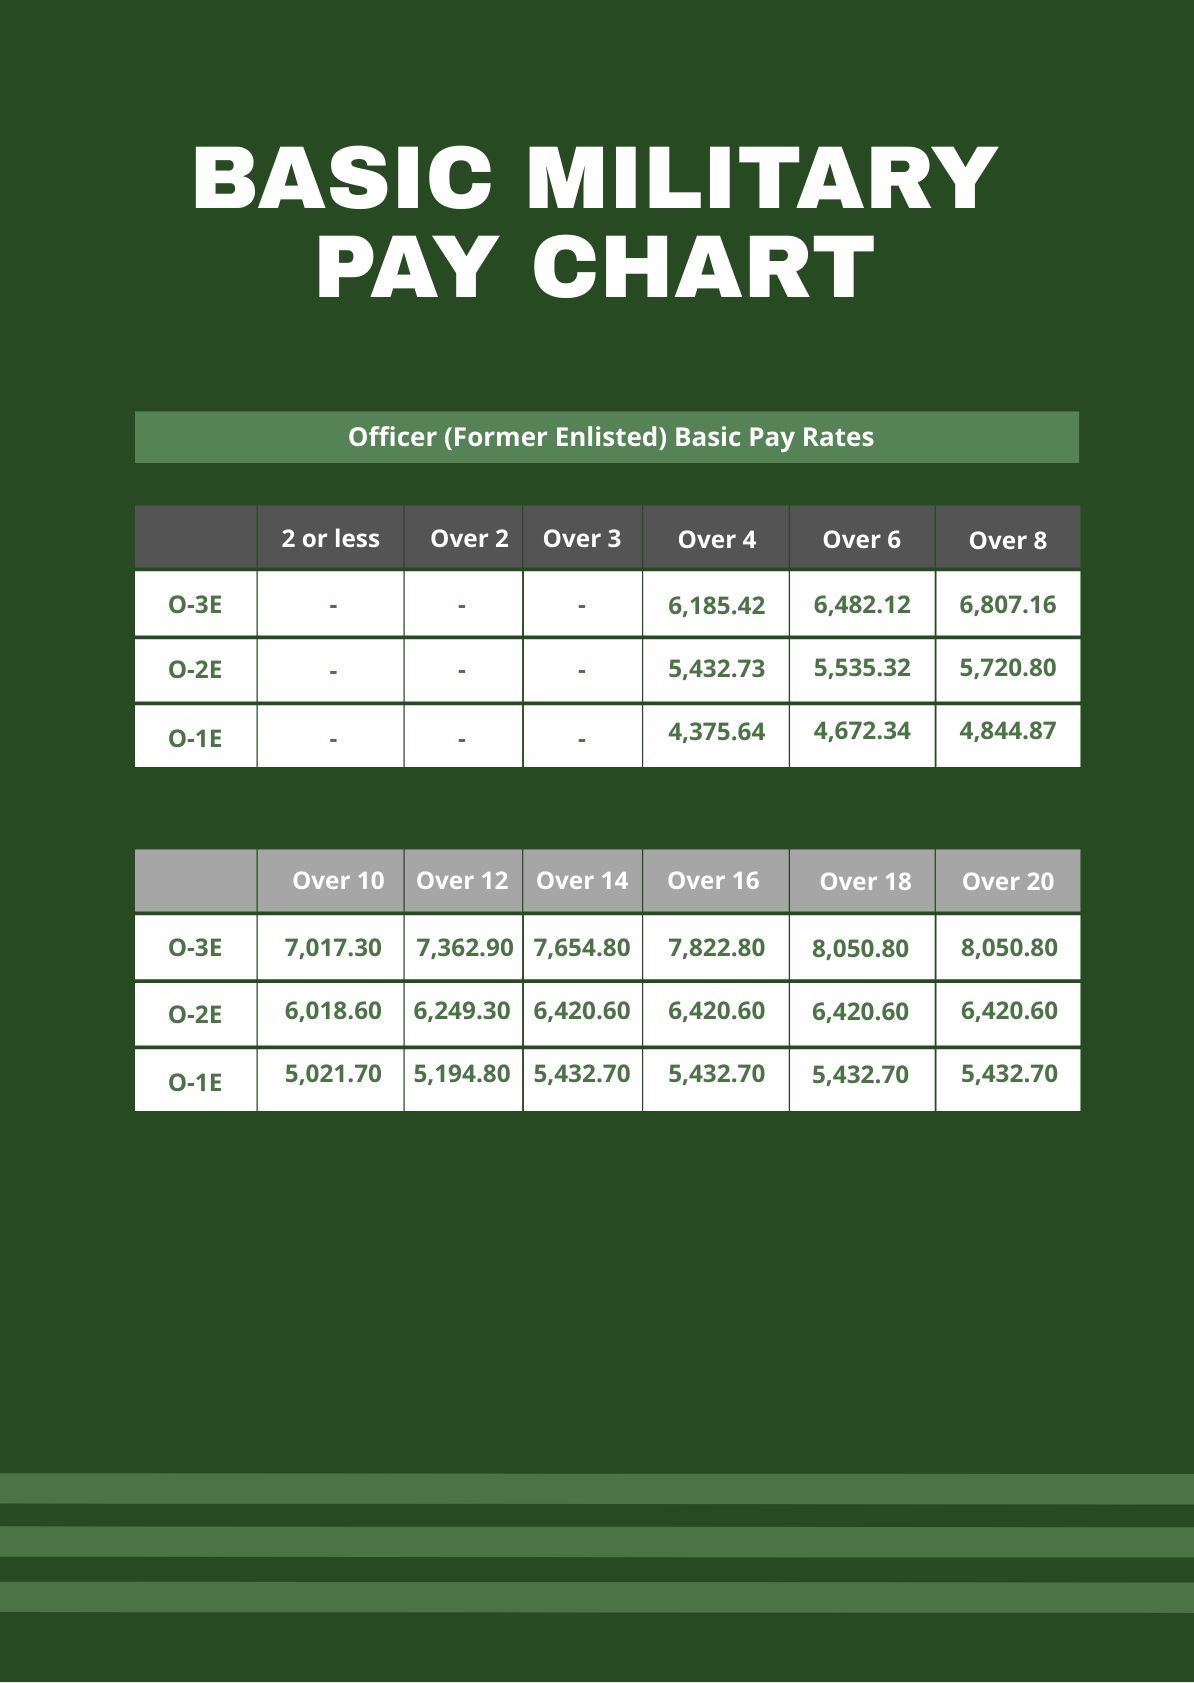 Basic Military Pay Chart in PDF